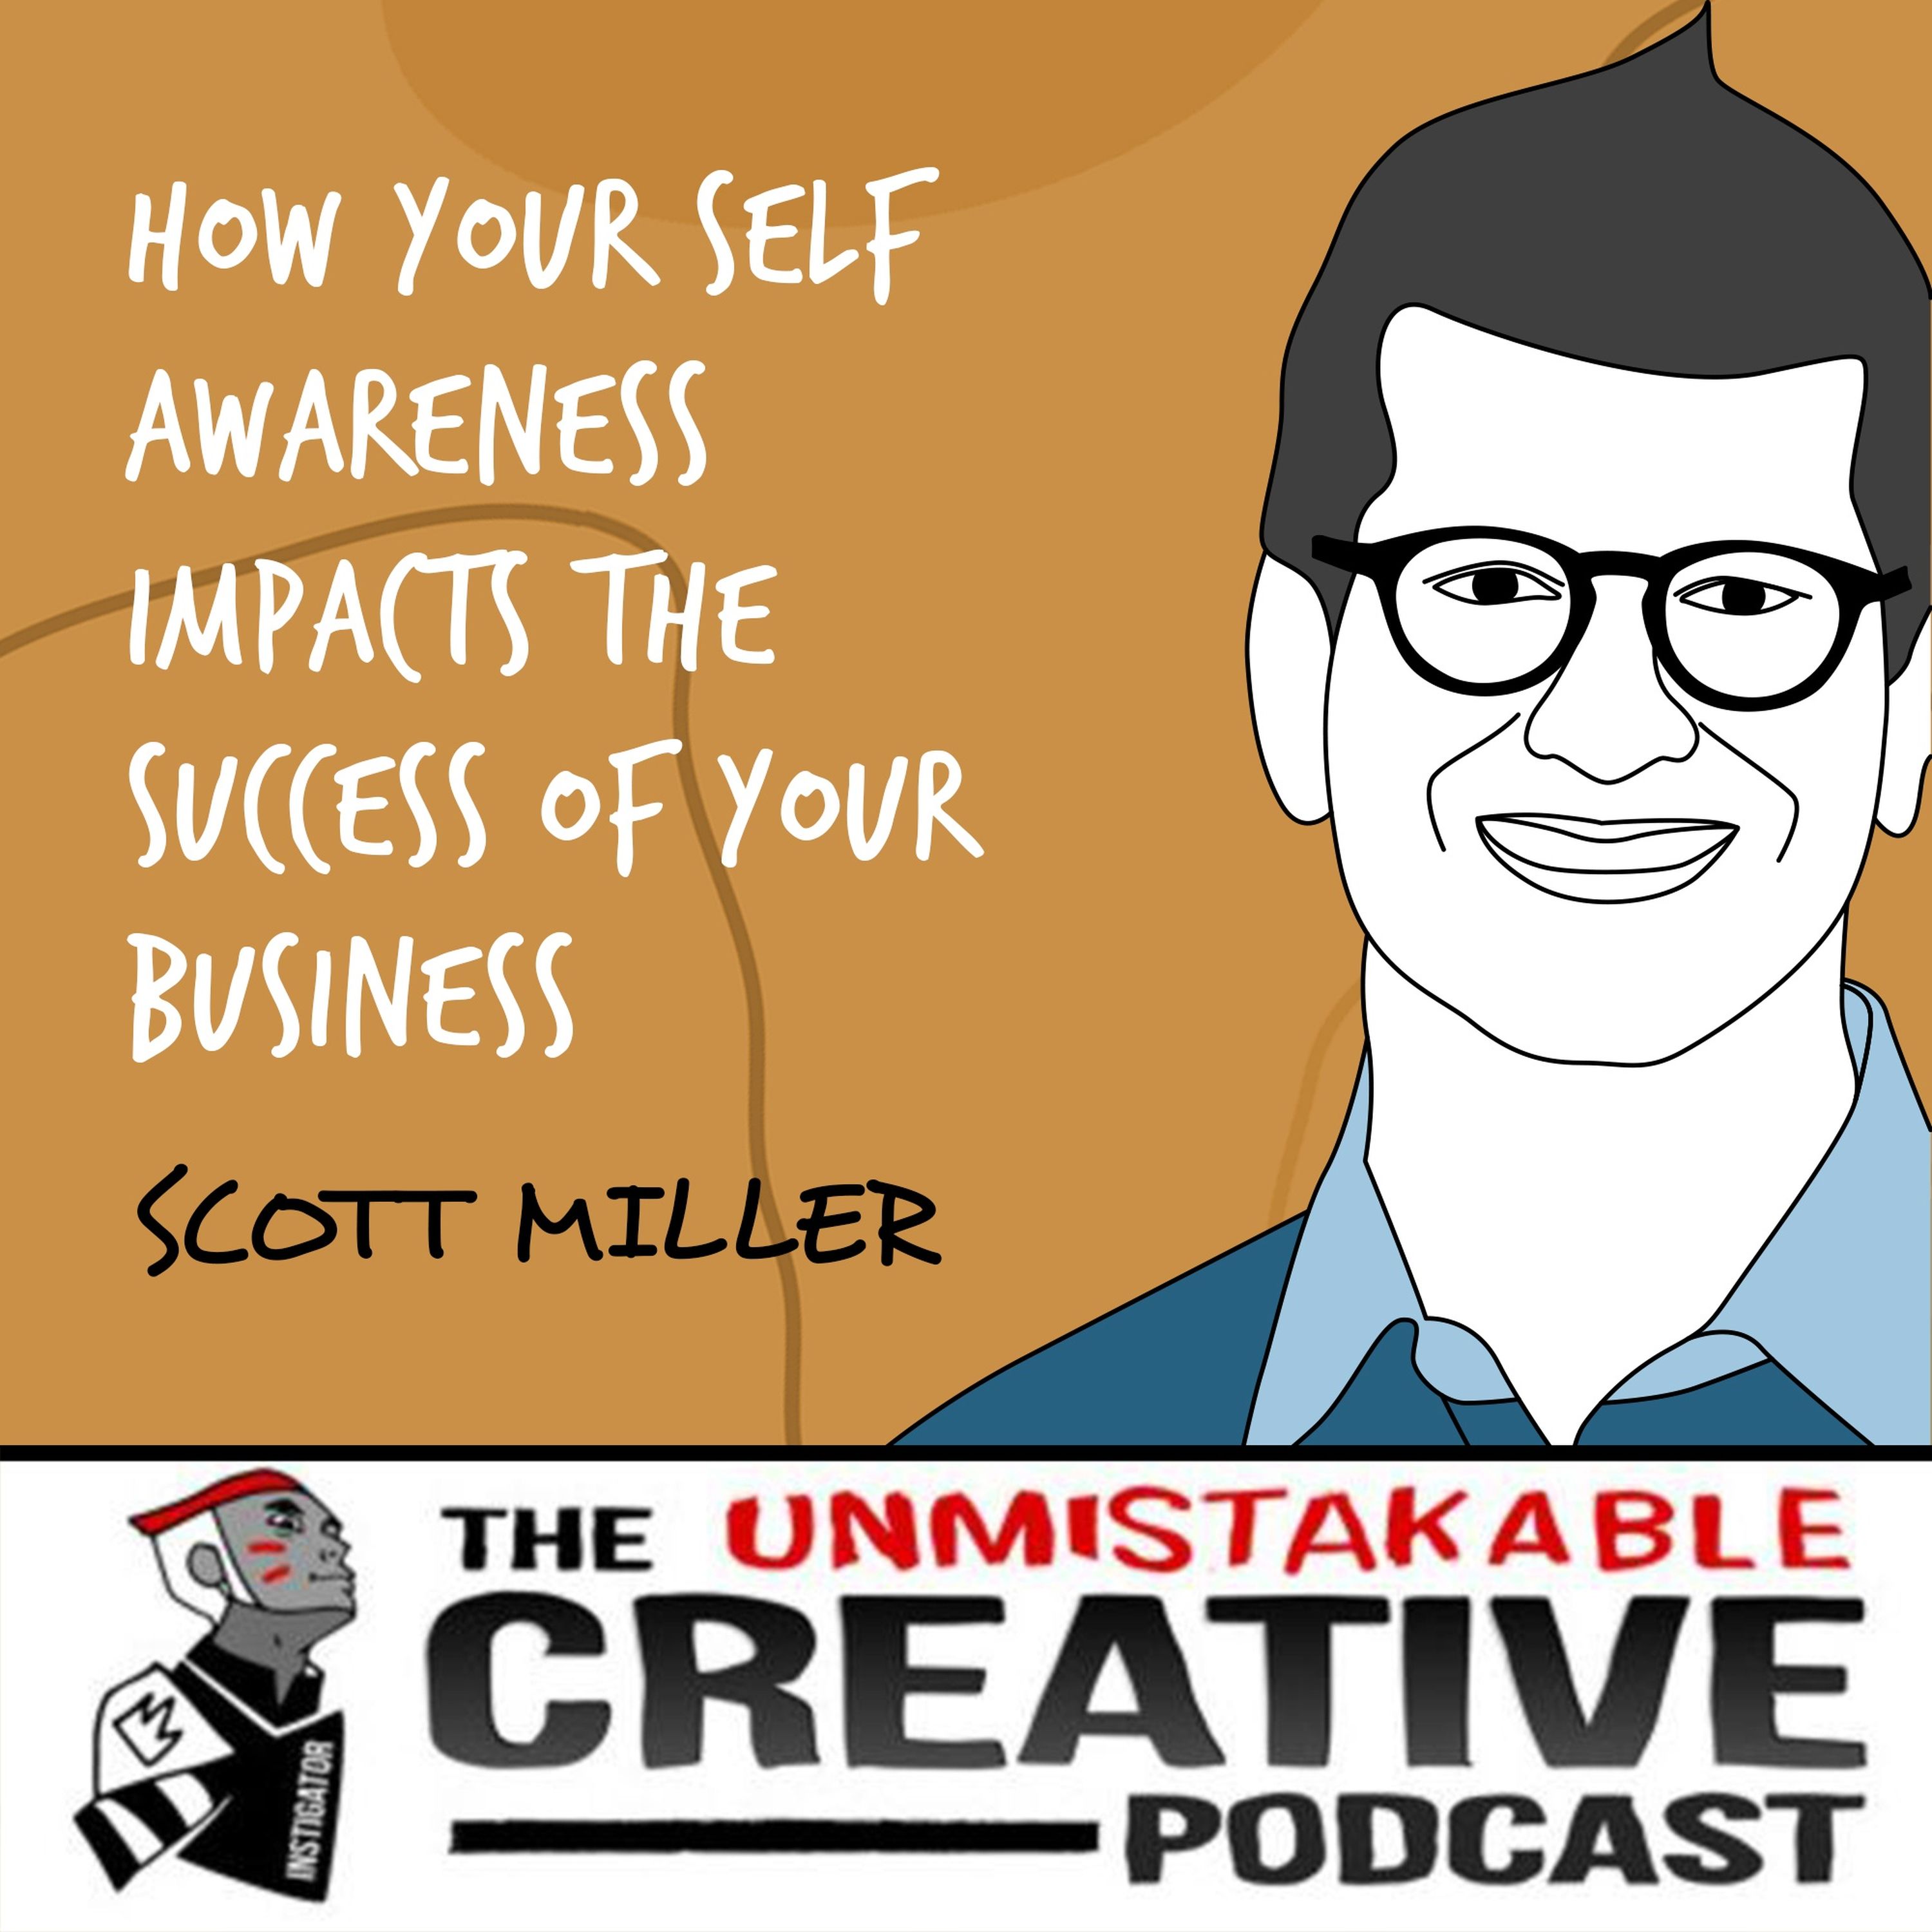 Scott Miller | How Your Self Awareness Impacts the Success of Your Business